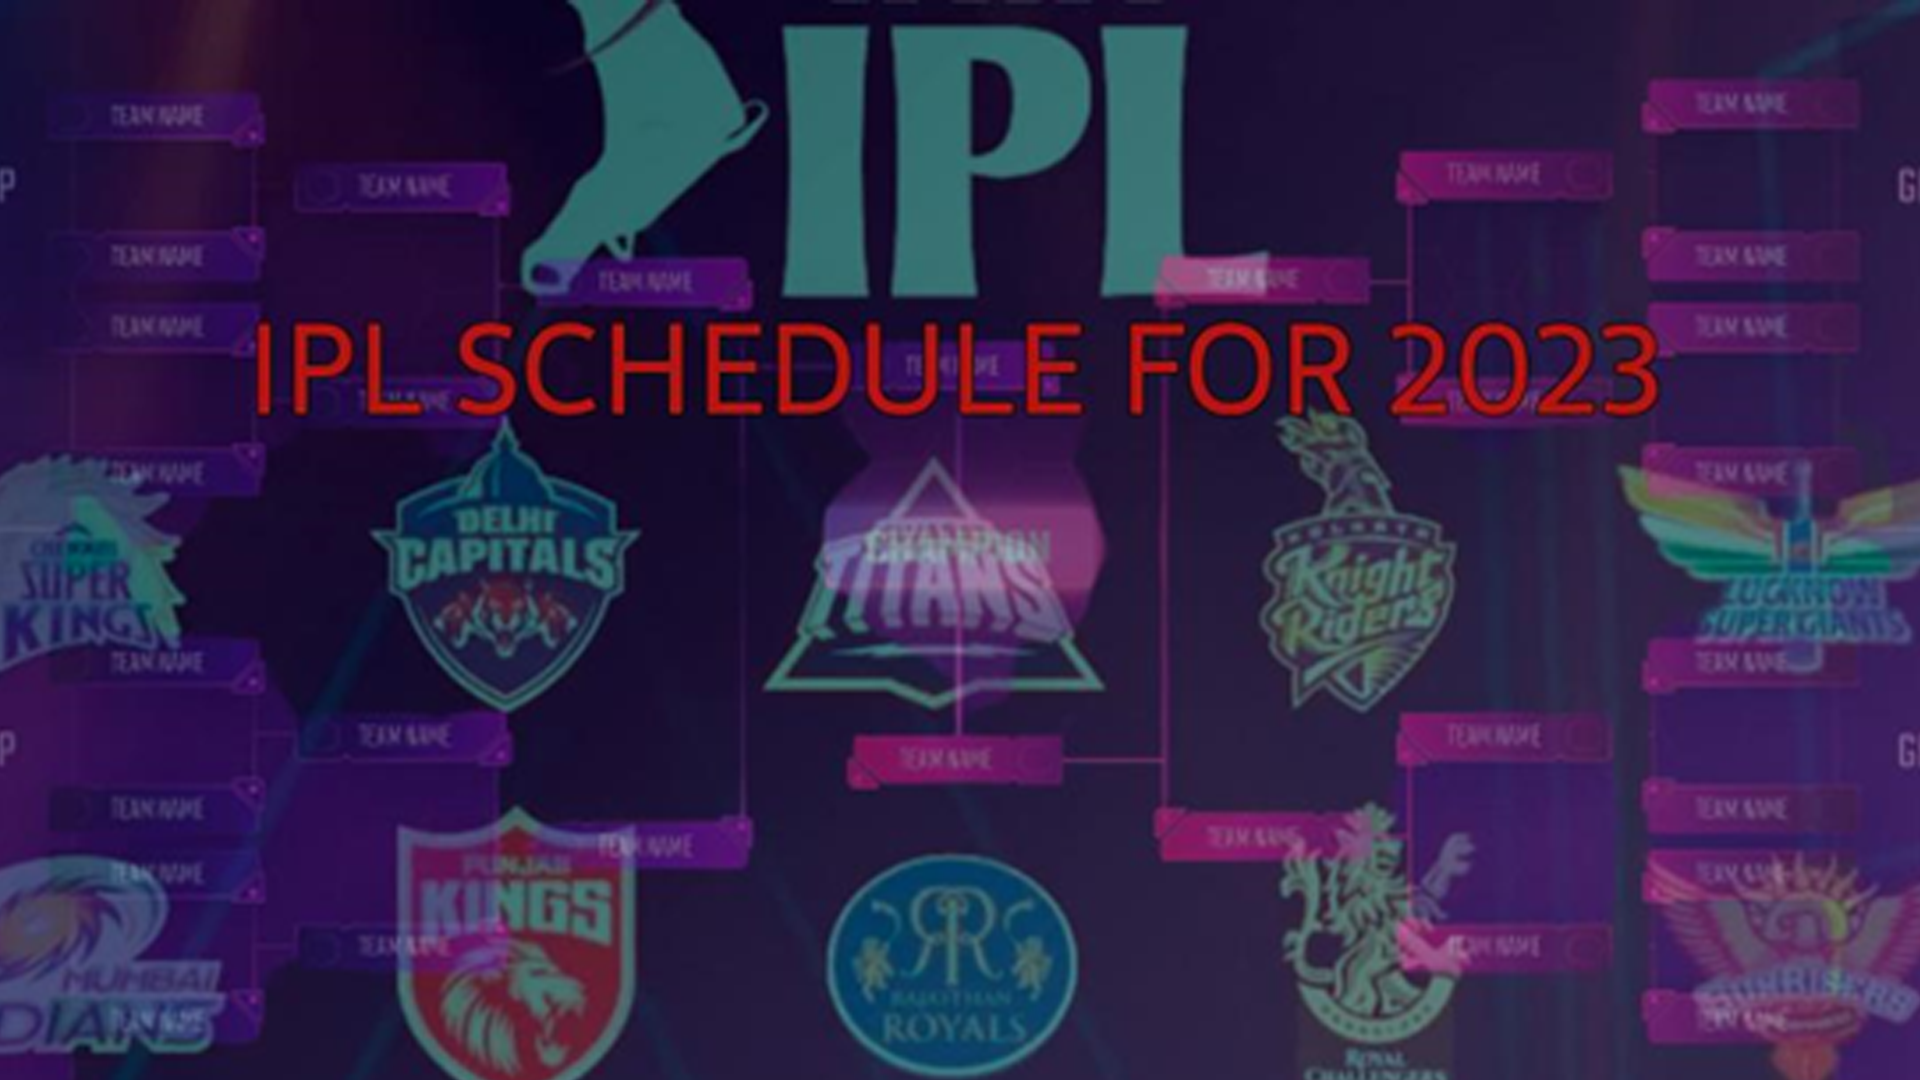 IPL schedule for 2023 Exciting Matches and Dates